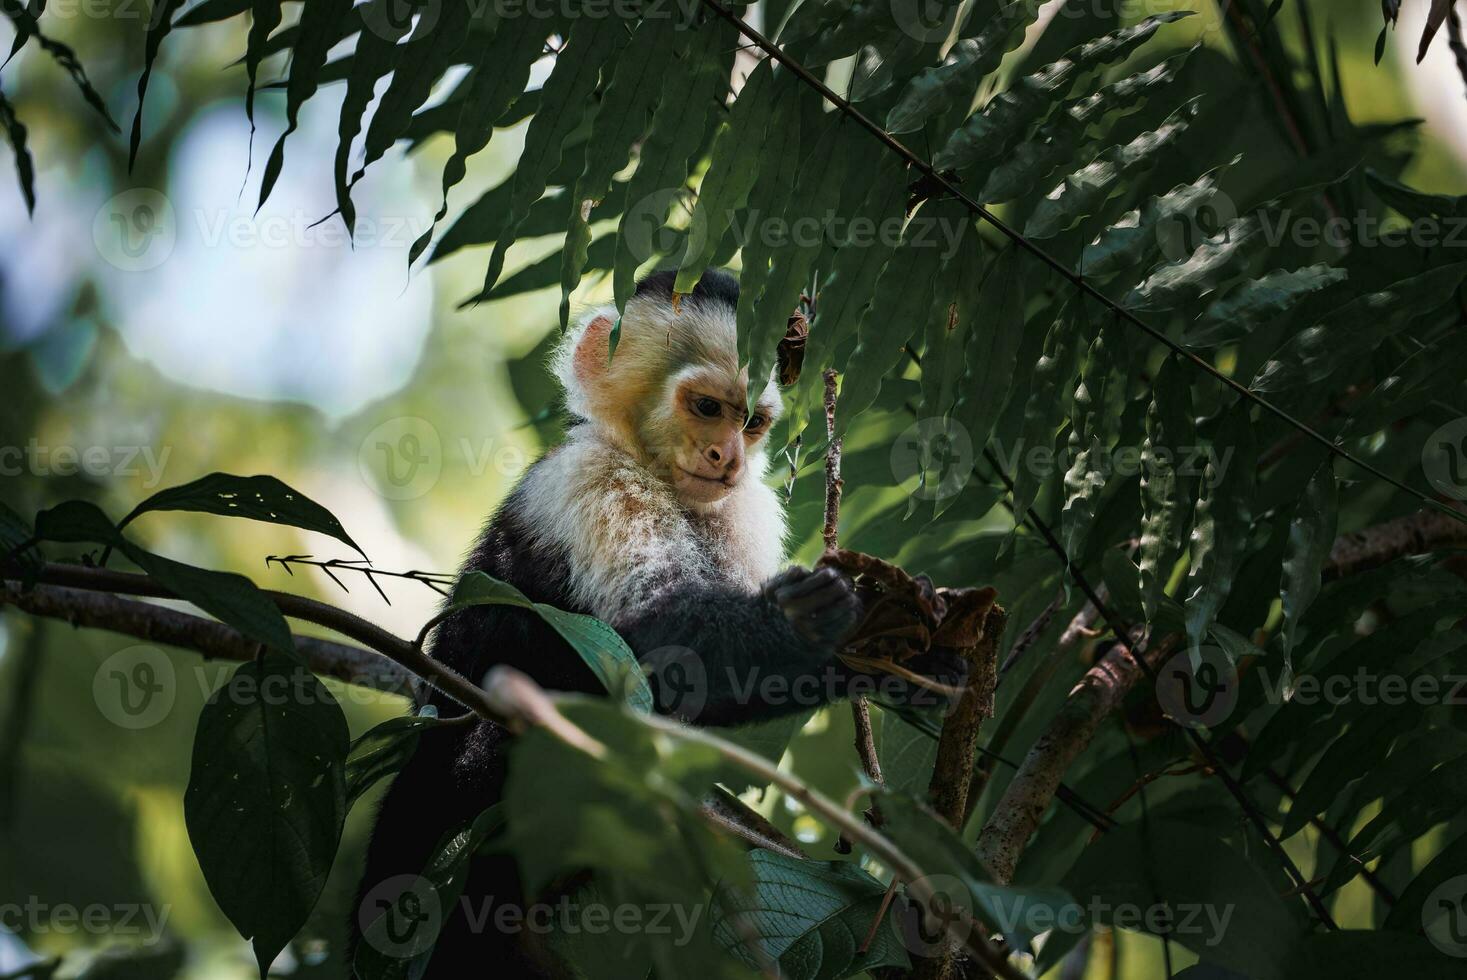 White-headed Capuchin, black monkey sitting on tree branch in the dark tropical forest. photo